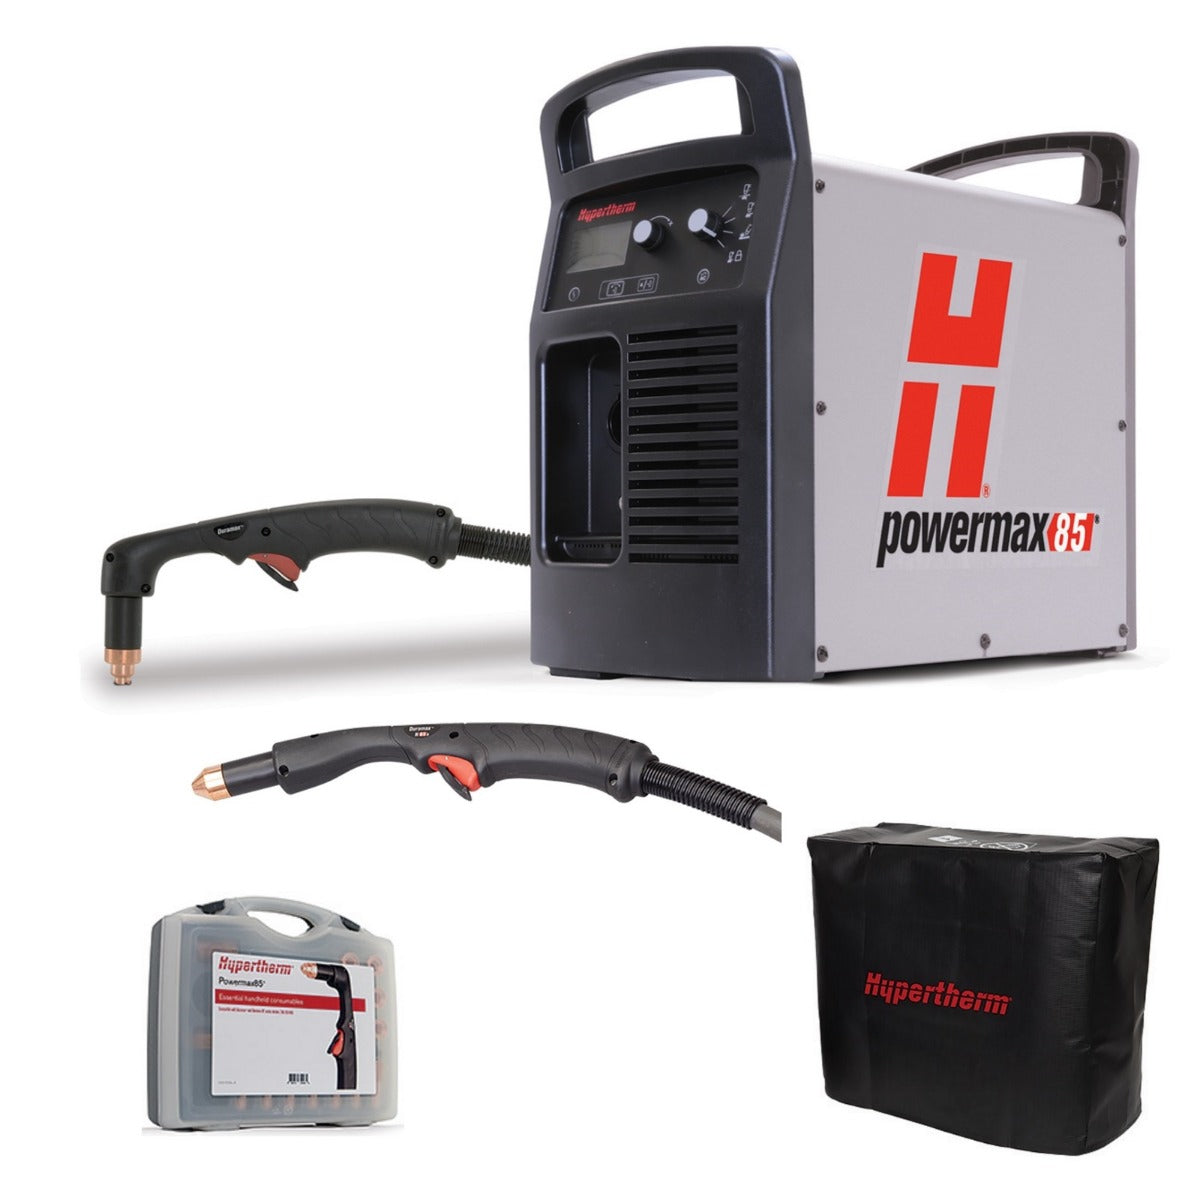 Hypertherm Powermax 85 w/CPC 25ft 75° and 15° Hand Torch Pkg (087144)